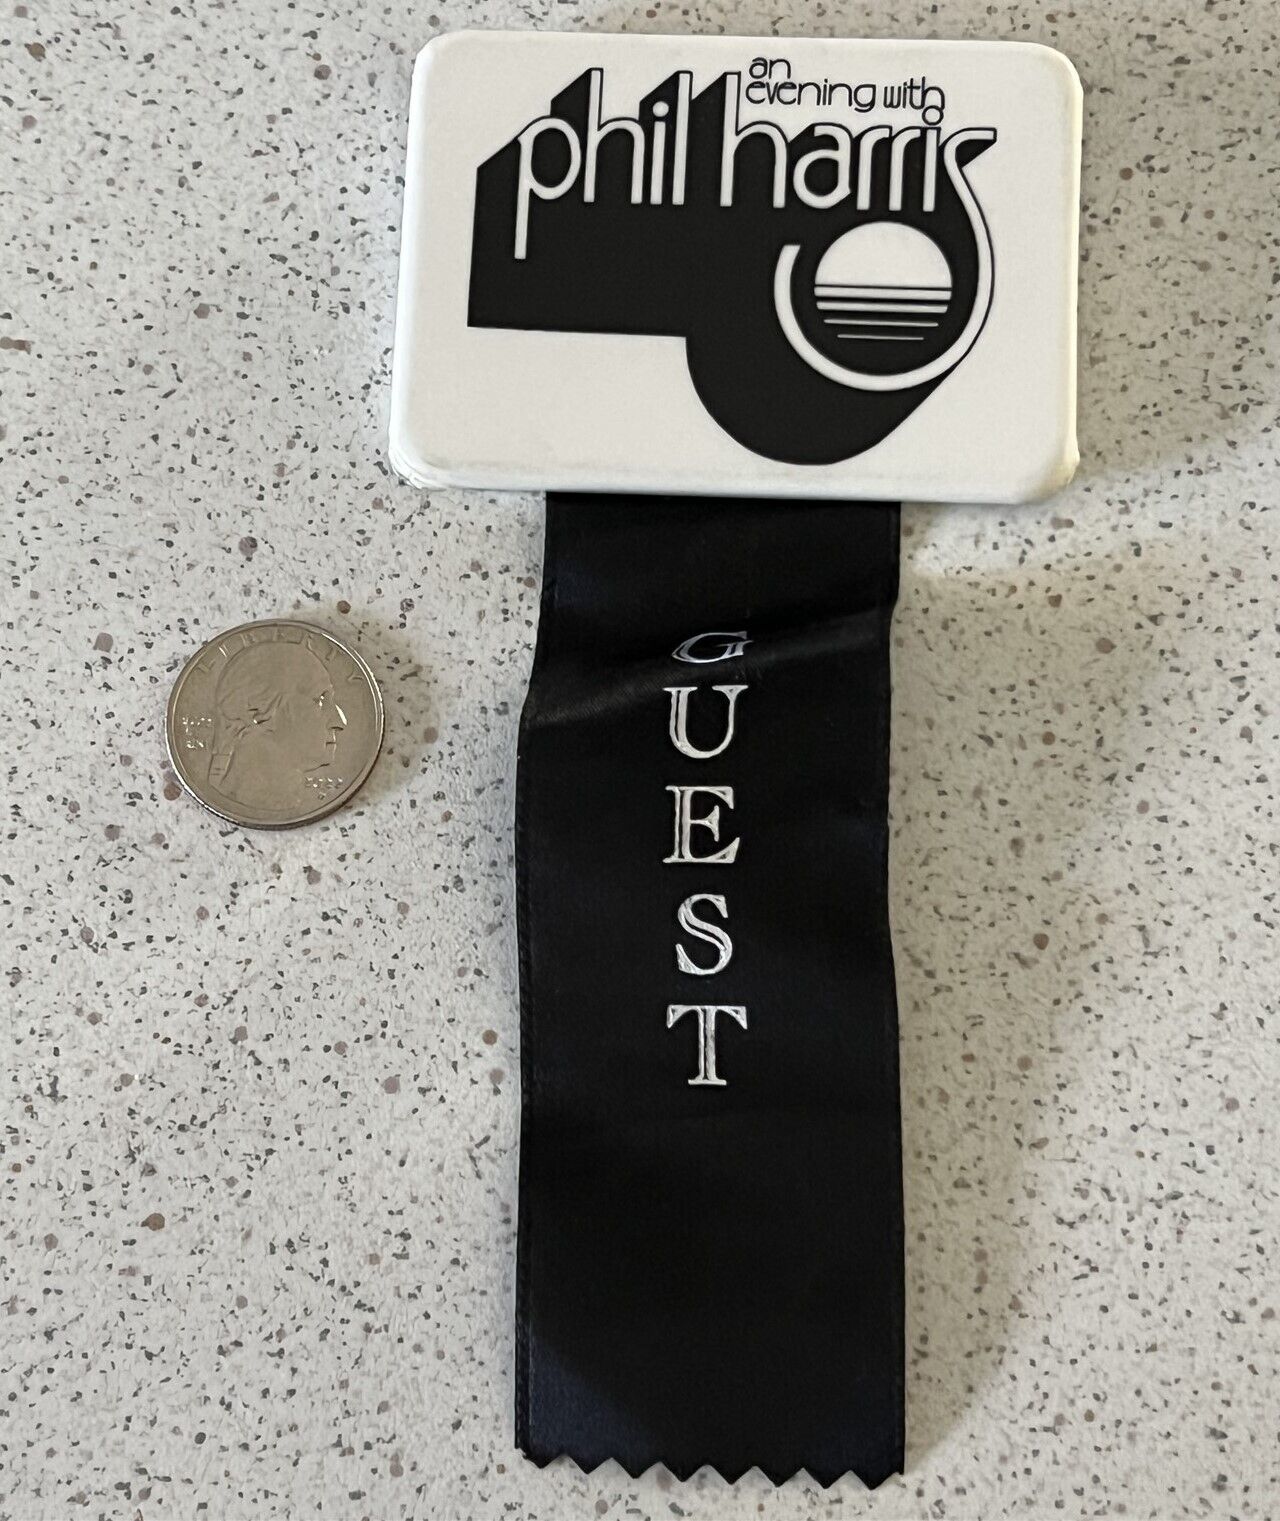 An Evening With Phil Harris Actor Singer Guest Ribbon & Pinback Button #45275